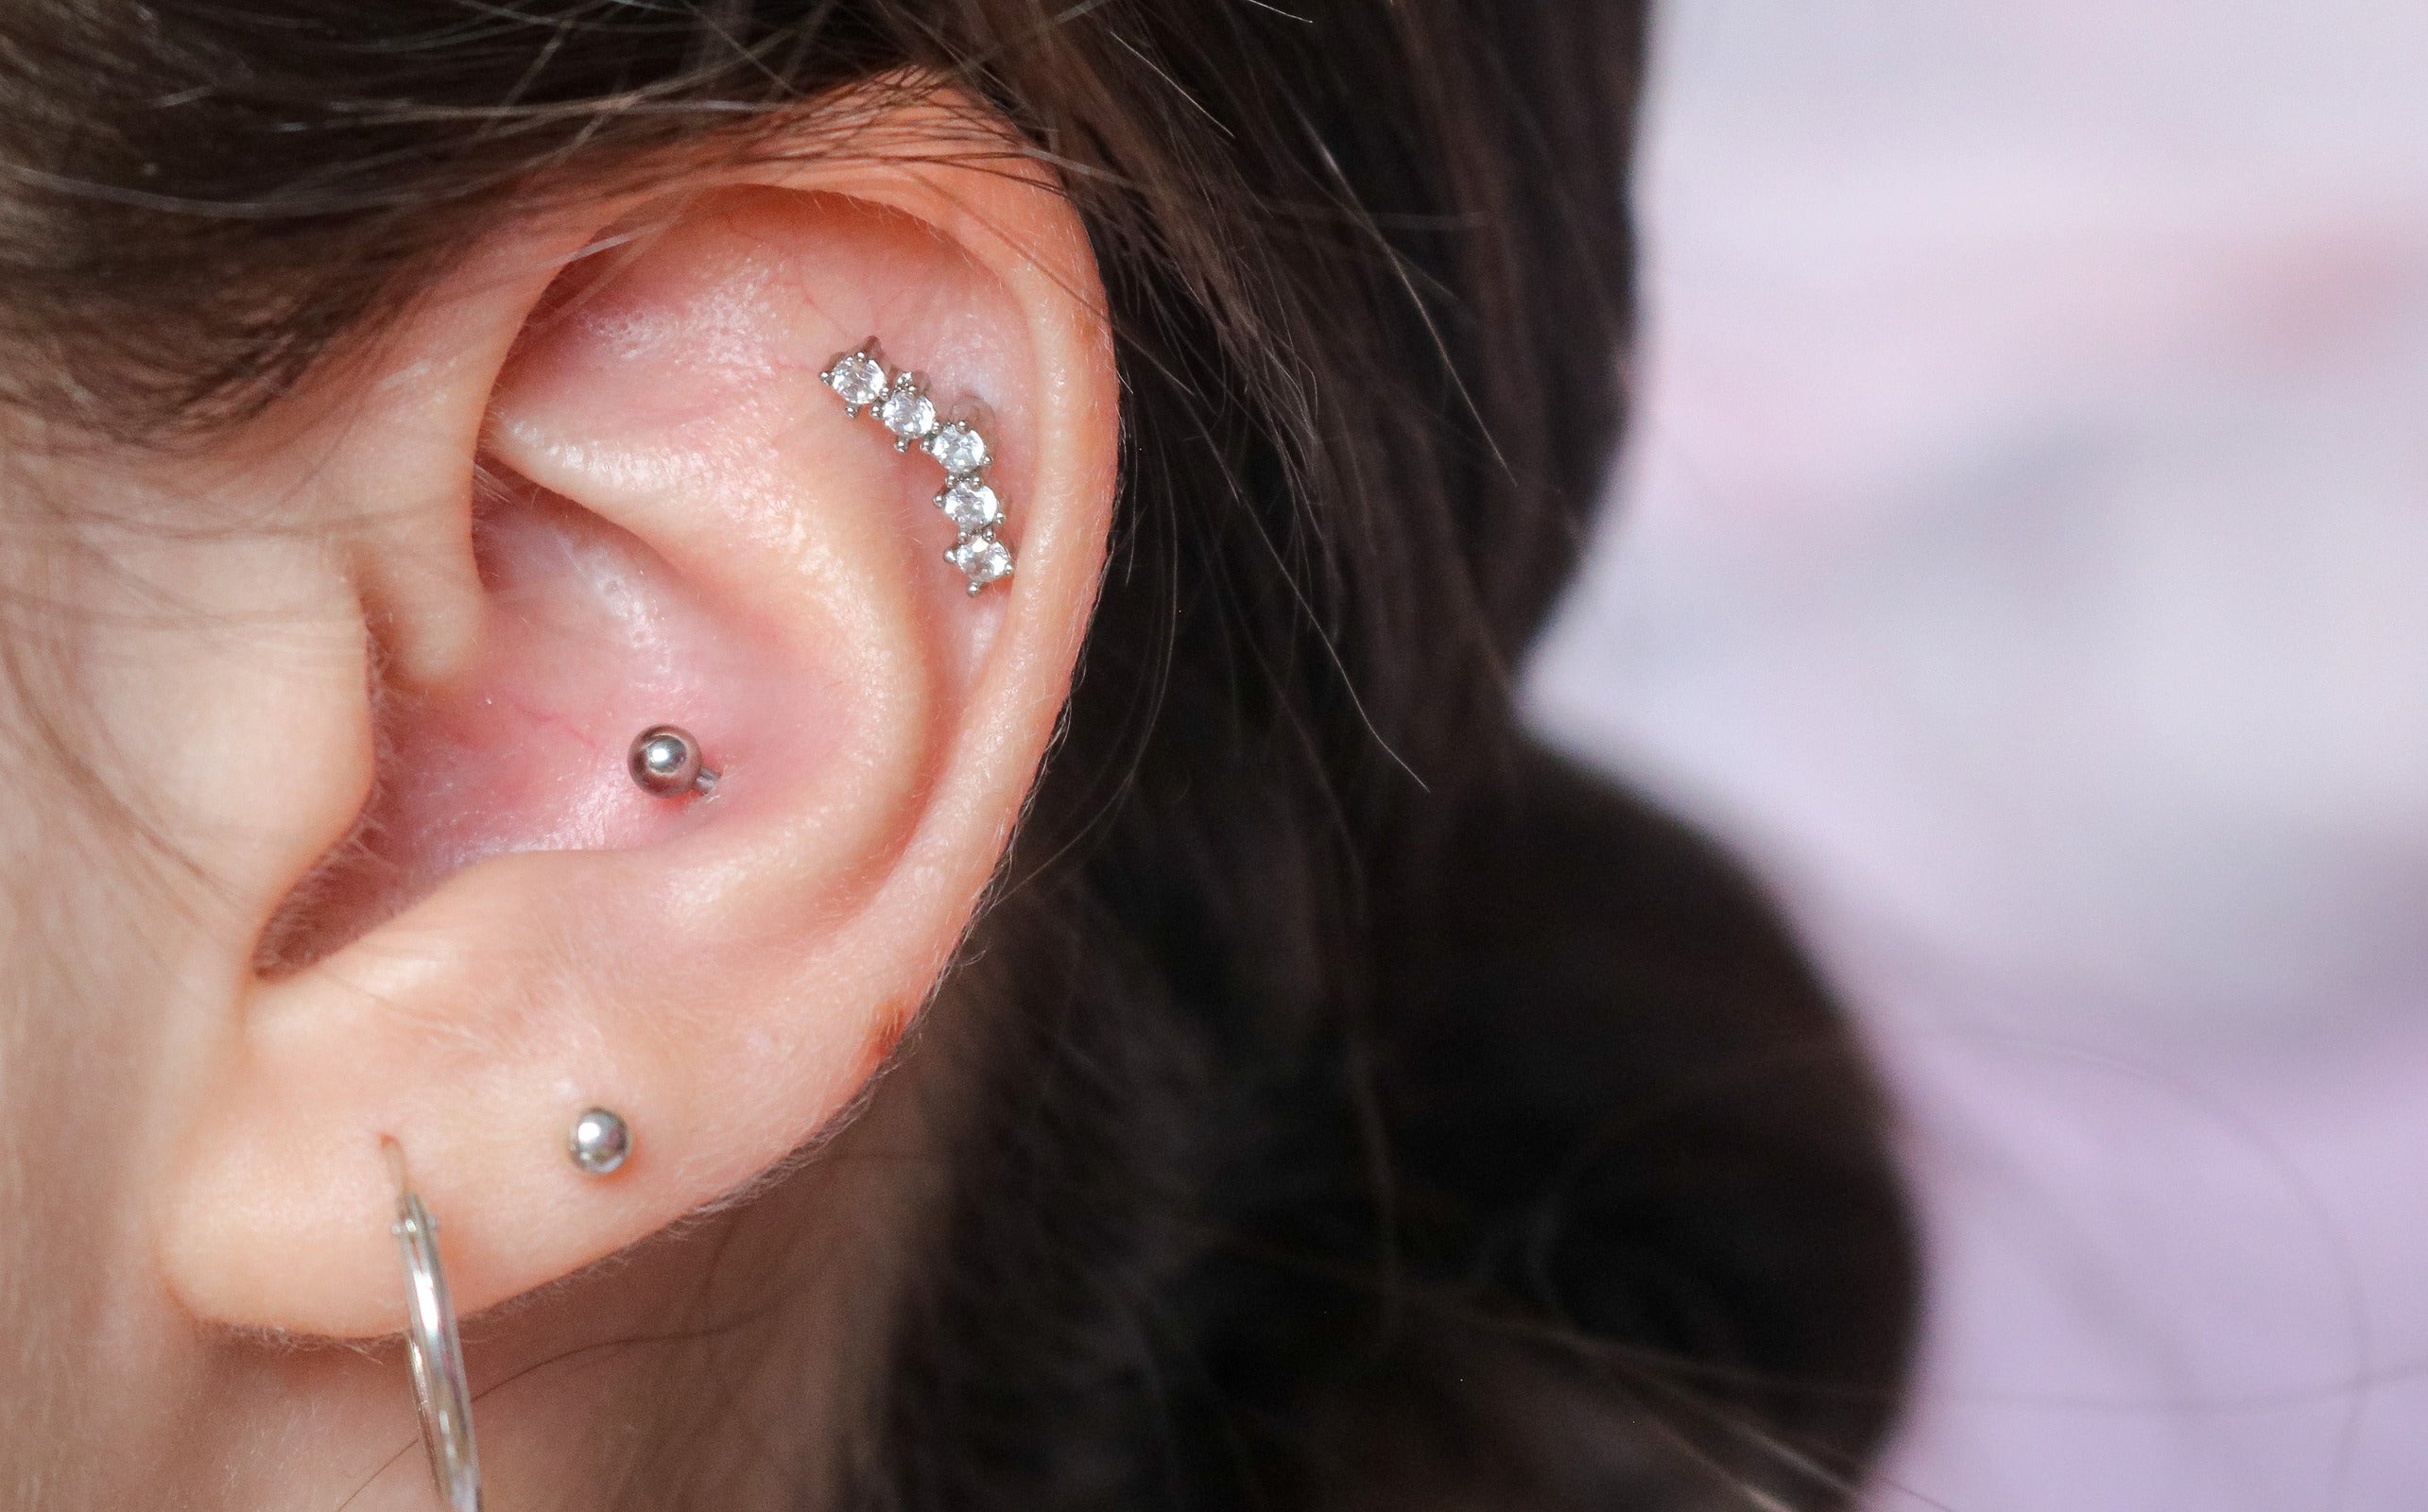 Piercings of the conch are moderately painful